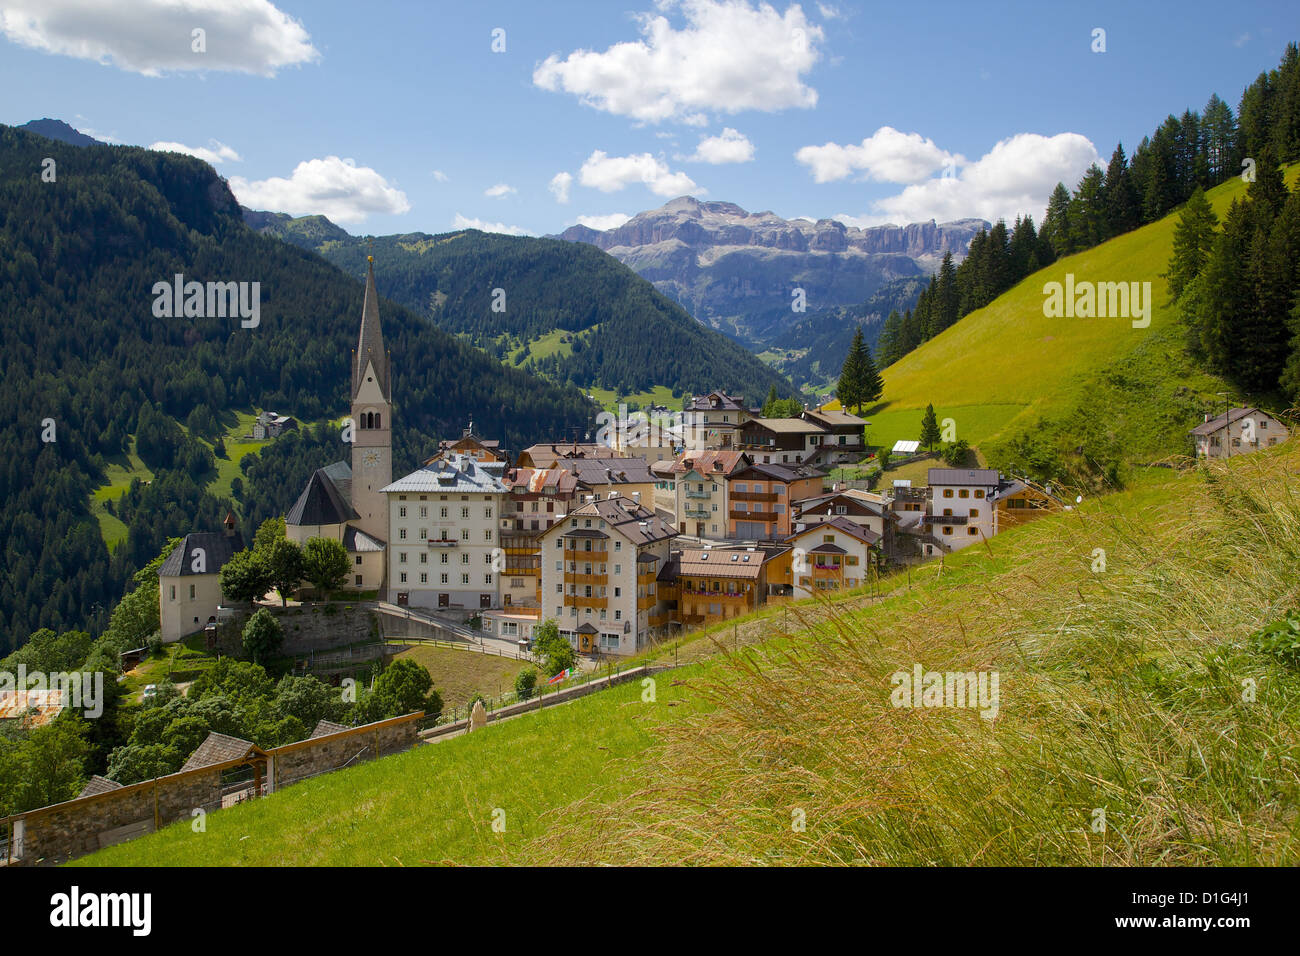 View of village and church, La Plie Pieve, Belluno Province, Dolomites, Italy, Europe Stock Photo